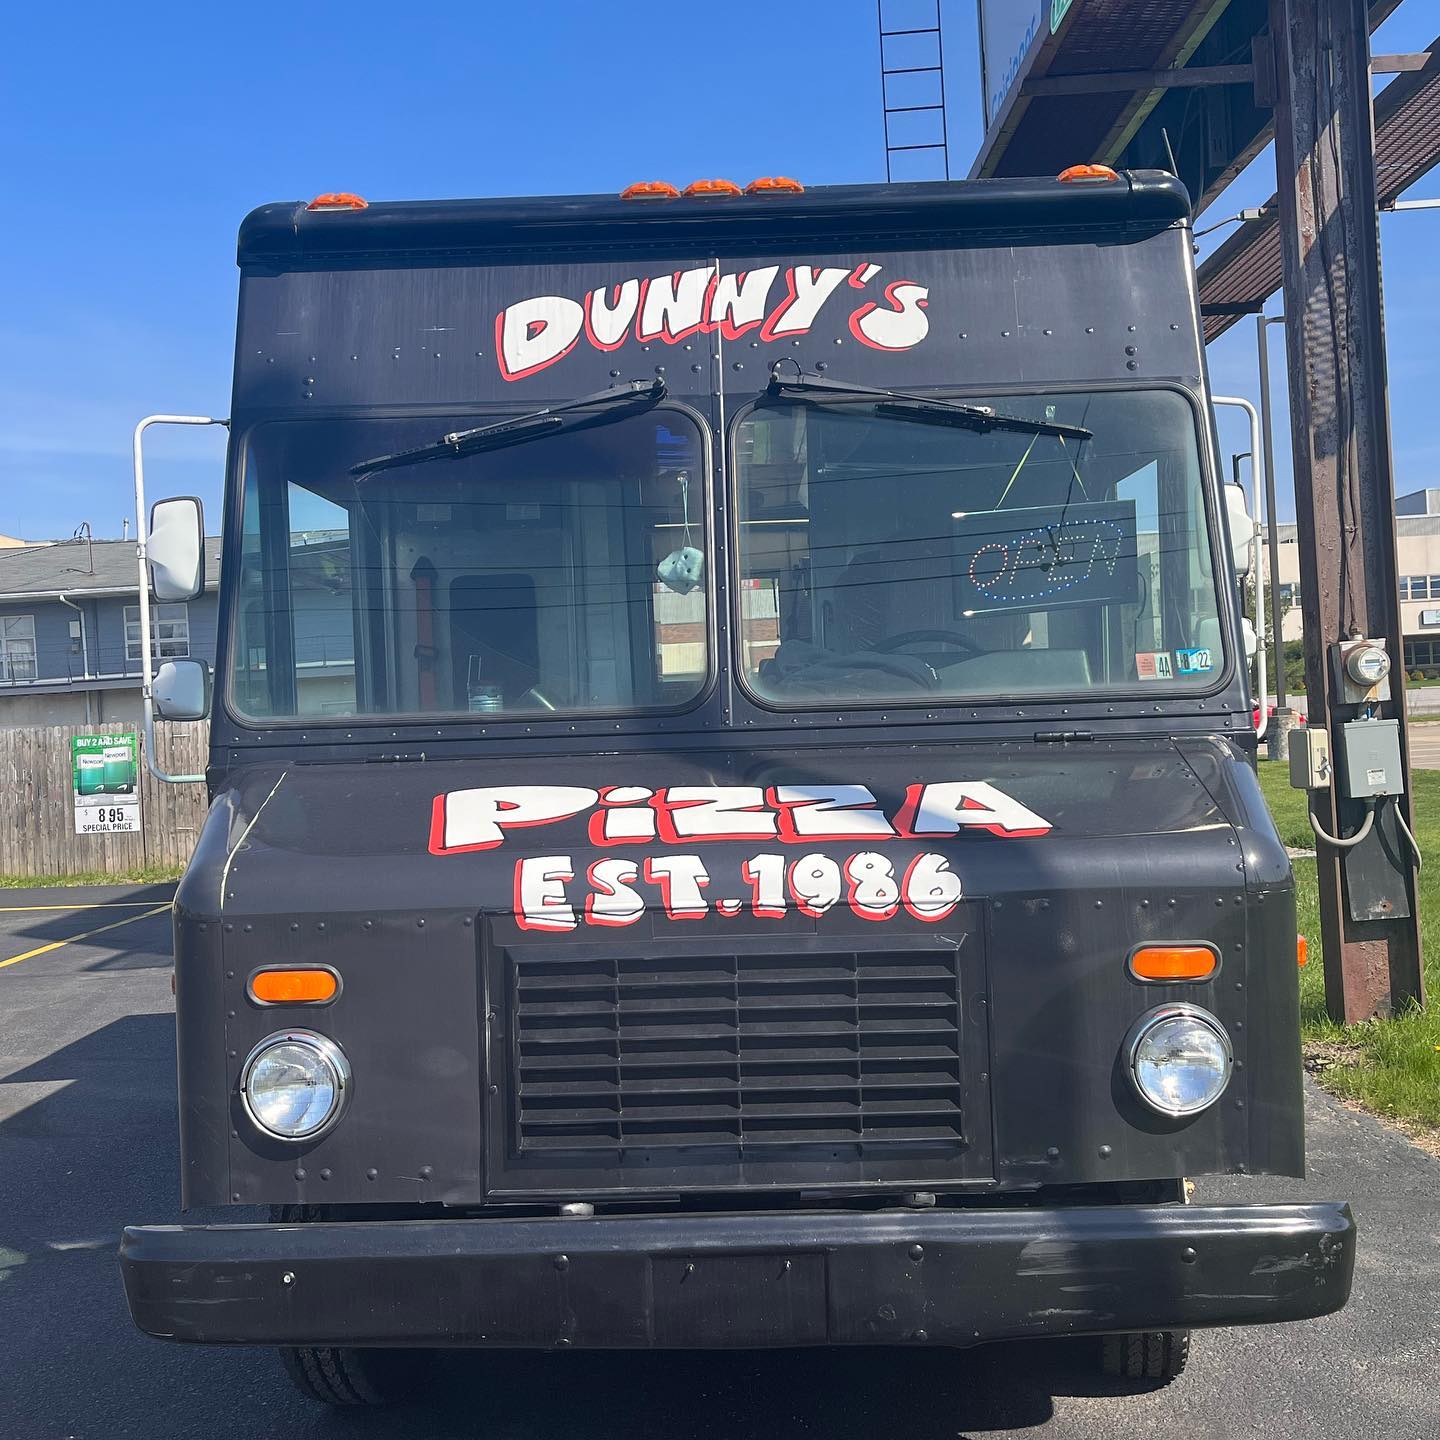 Dunny's Food Truck